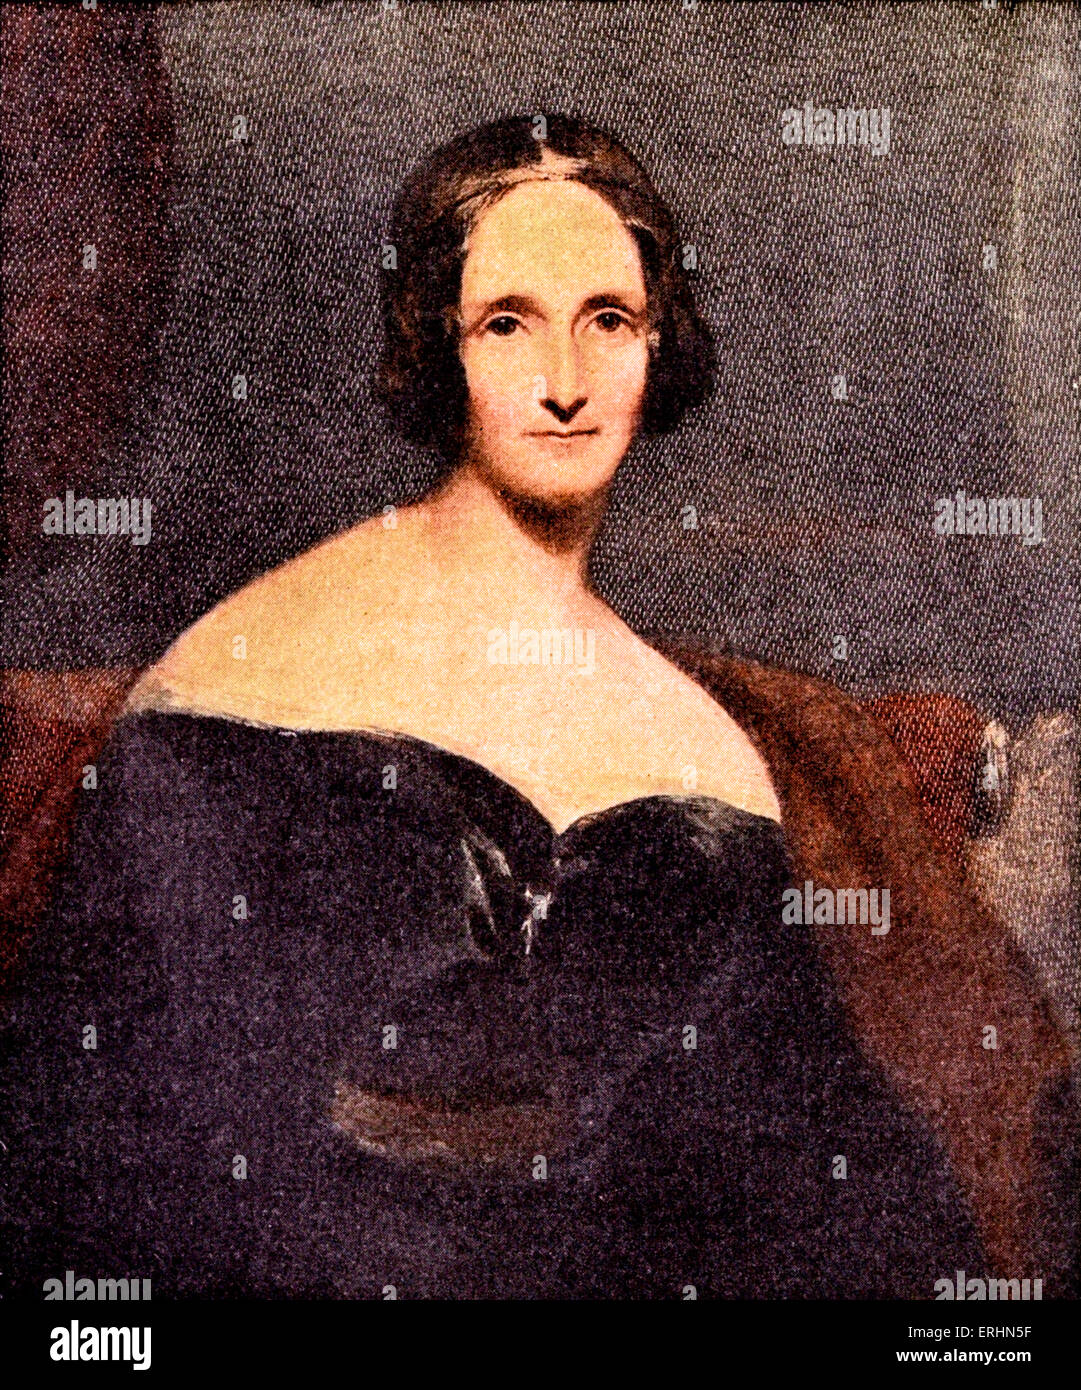 Mary Wollstonecraft Shelley - portrait. British author, 30 August 1797 – 1 February 185.  Author of Frankenstein.  Married to Stock Photo